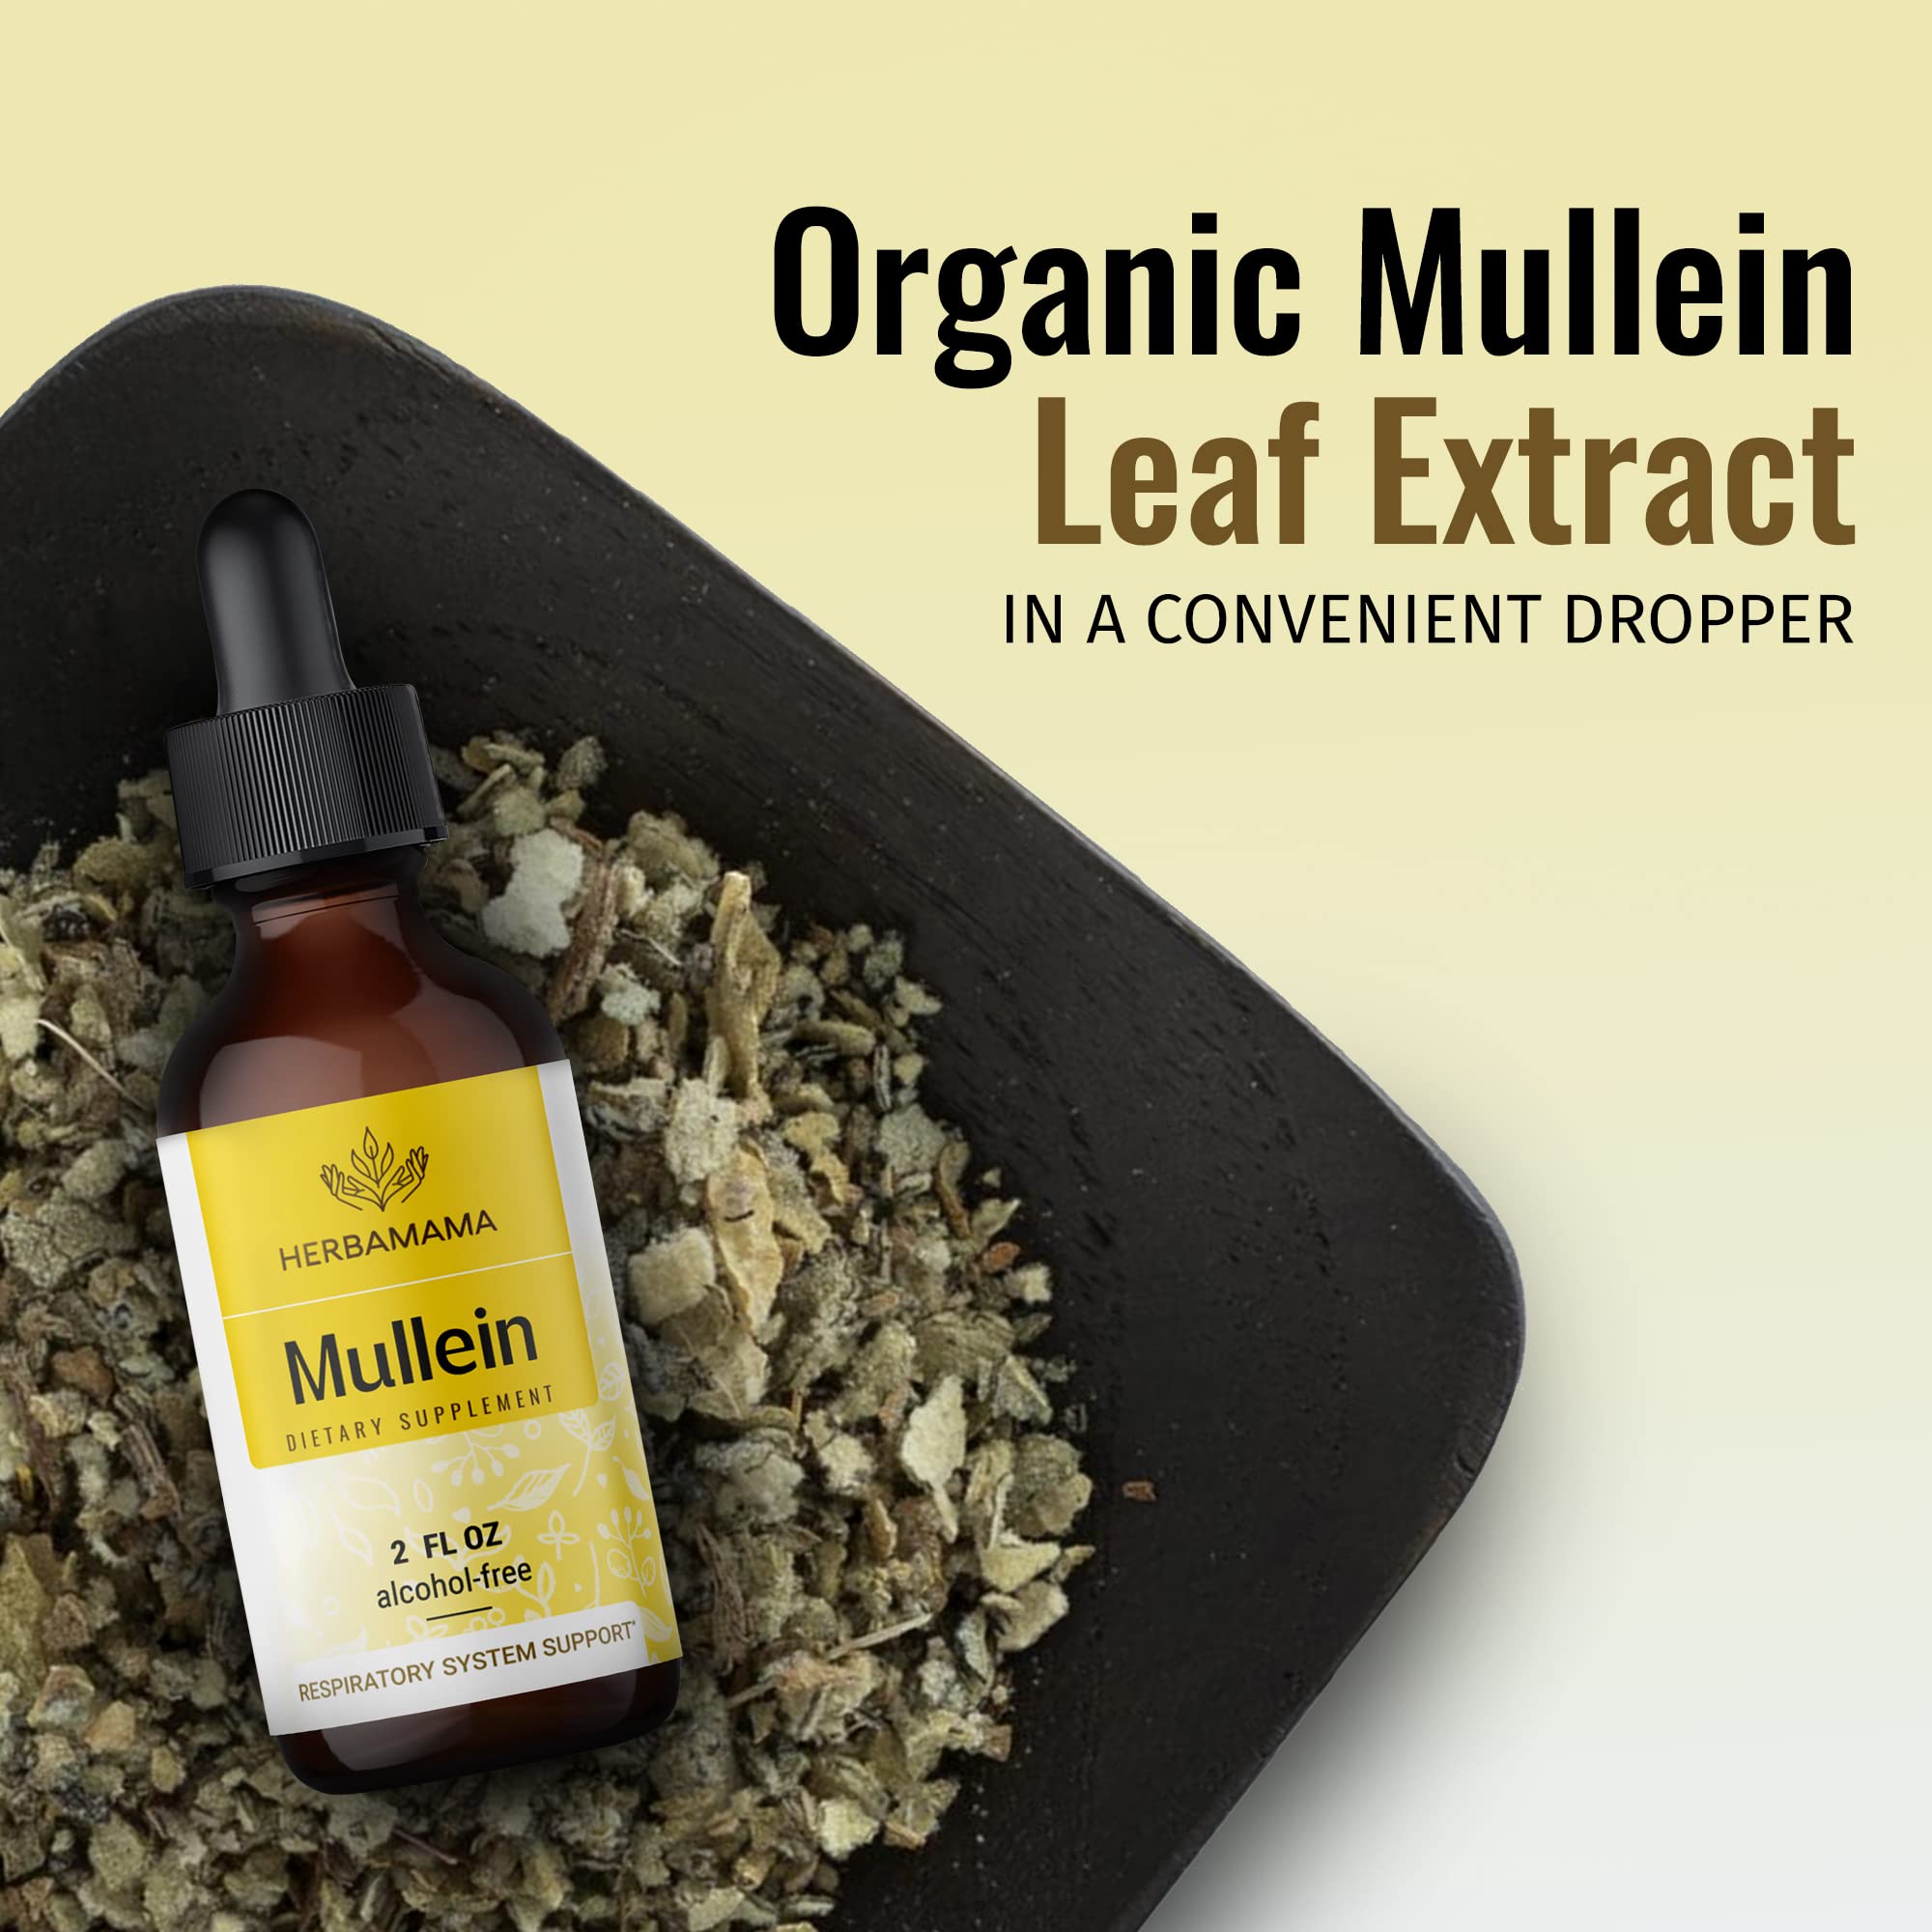 Mullein Leaf Tincture - Lung Cleanse - Vegan Lung Detox - Respiratory Health and Immune Support Drops - Natural Supplement Liquid Extract 2 fl.oz.